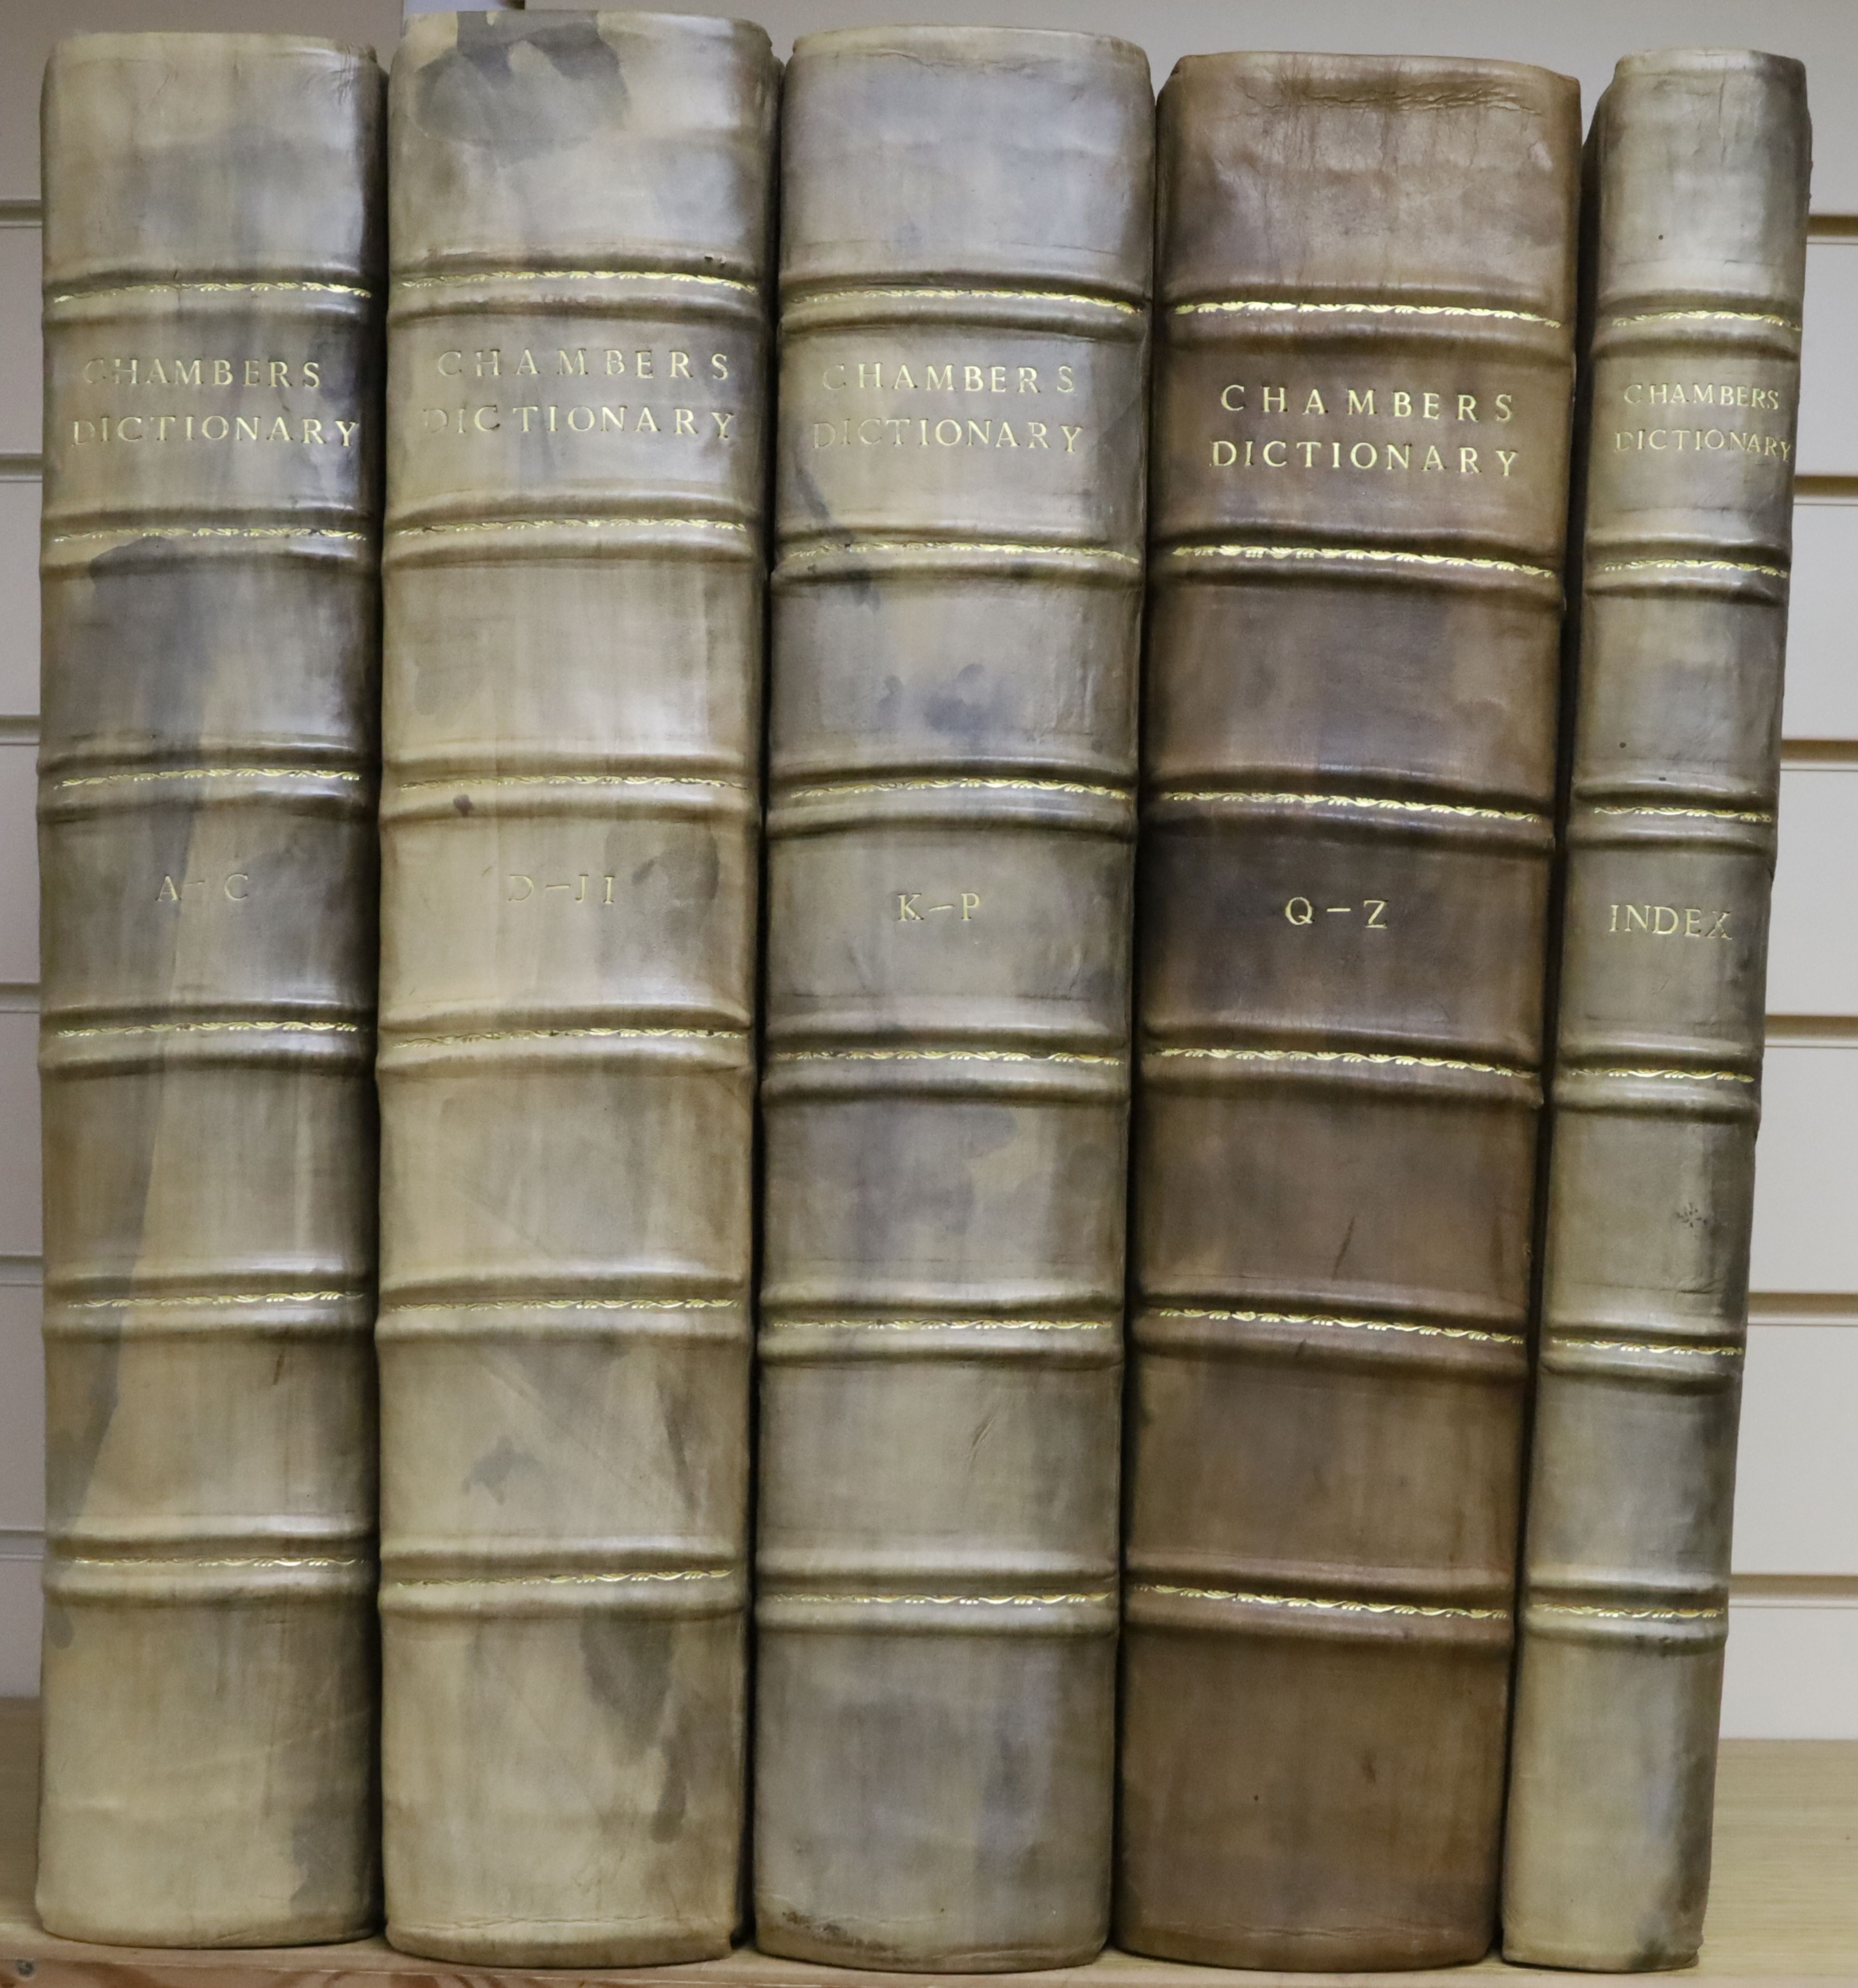 Chambers, Ephraim - Cyclopeadia: or, an Universal Dictionary of Arts and Sciences, 5 vols, folio,